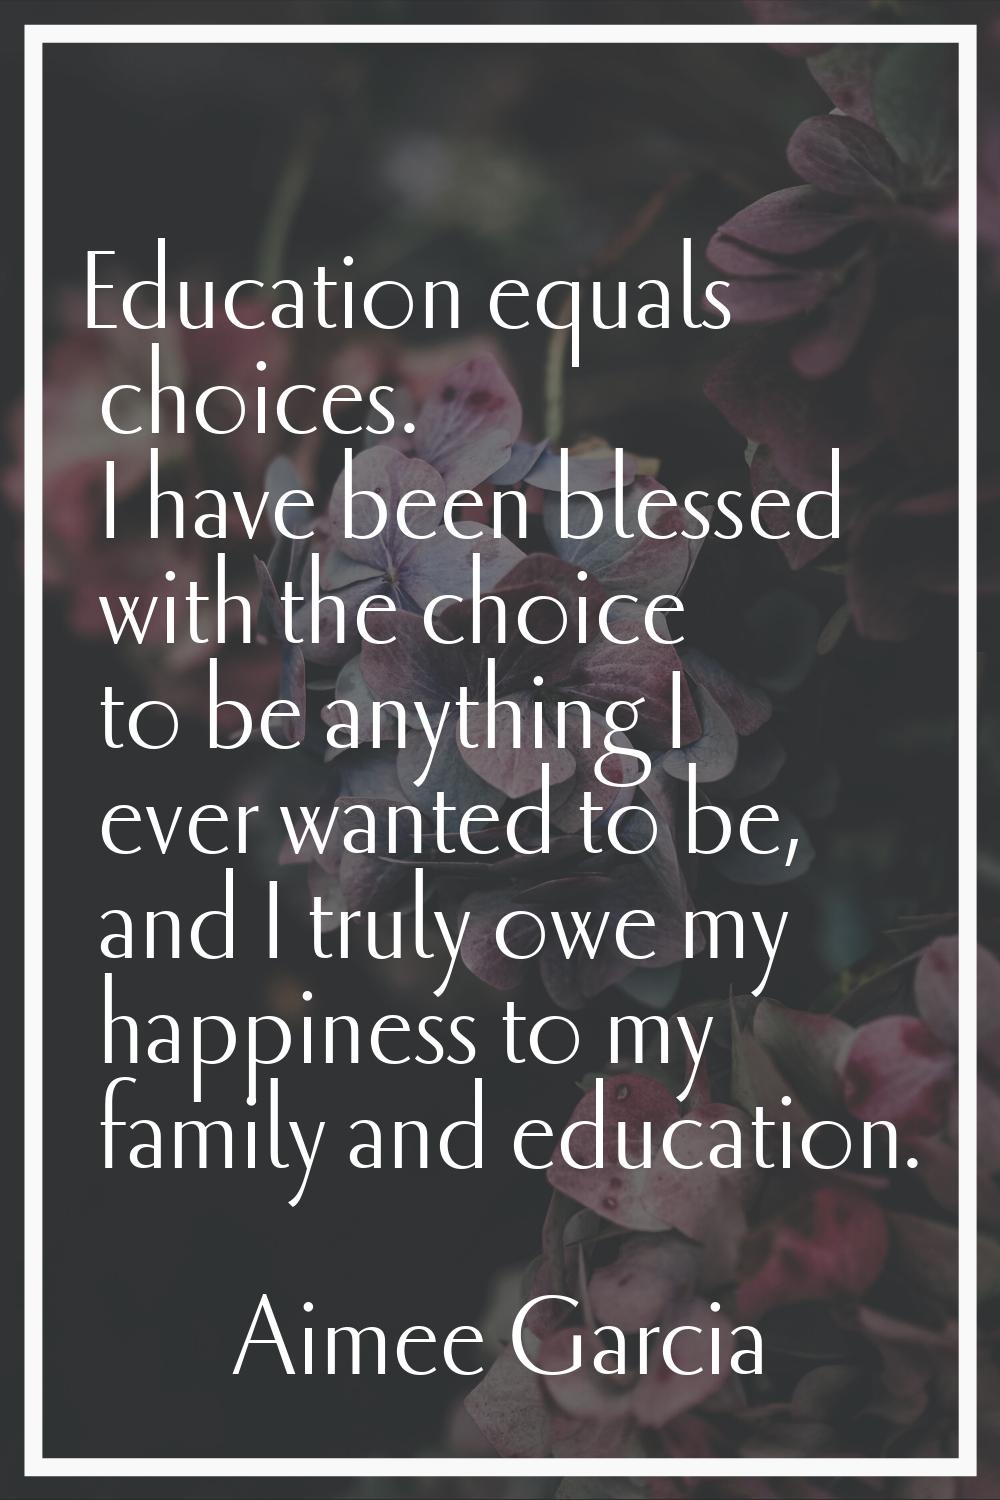 Education equals choices. I have been blessed with the choice to be anything I ever wanted to be, a